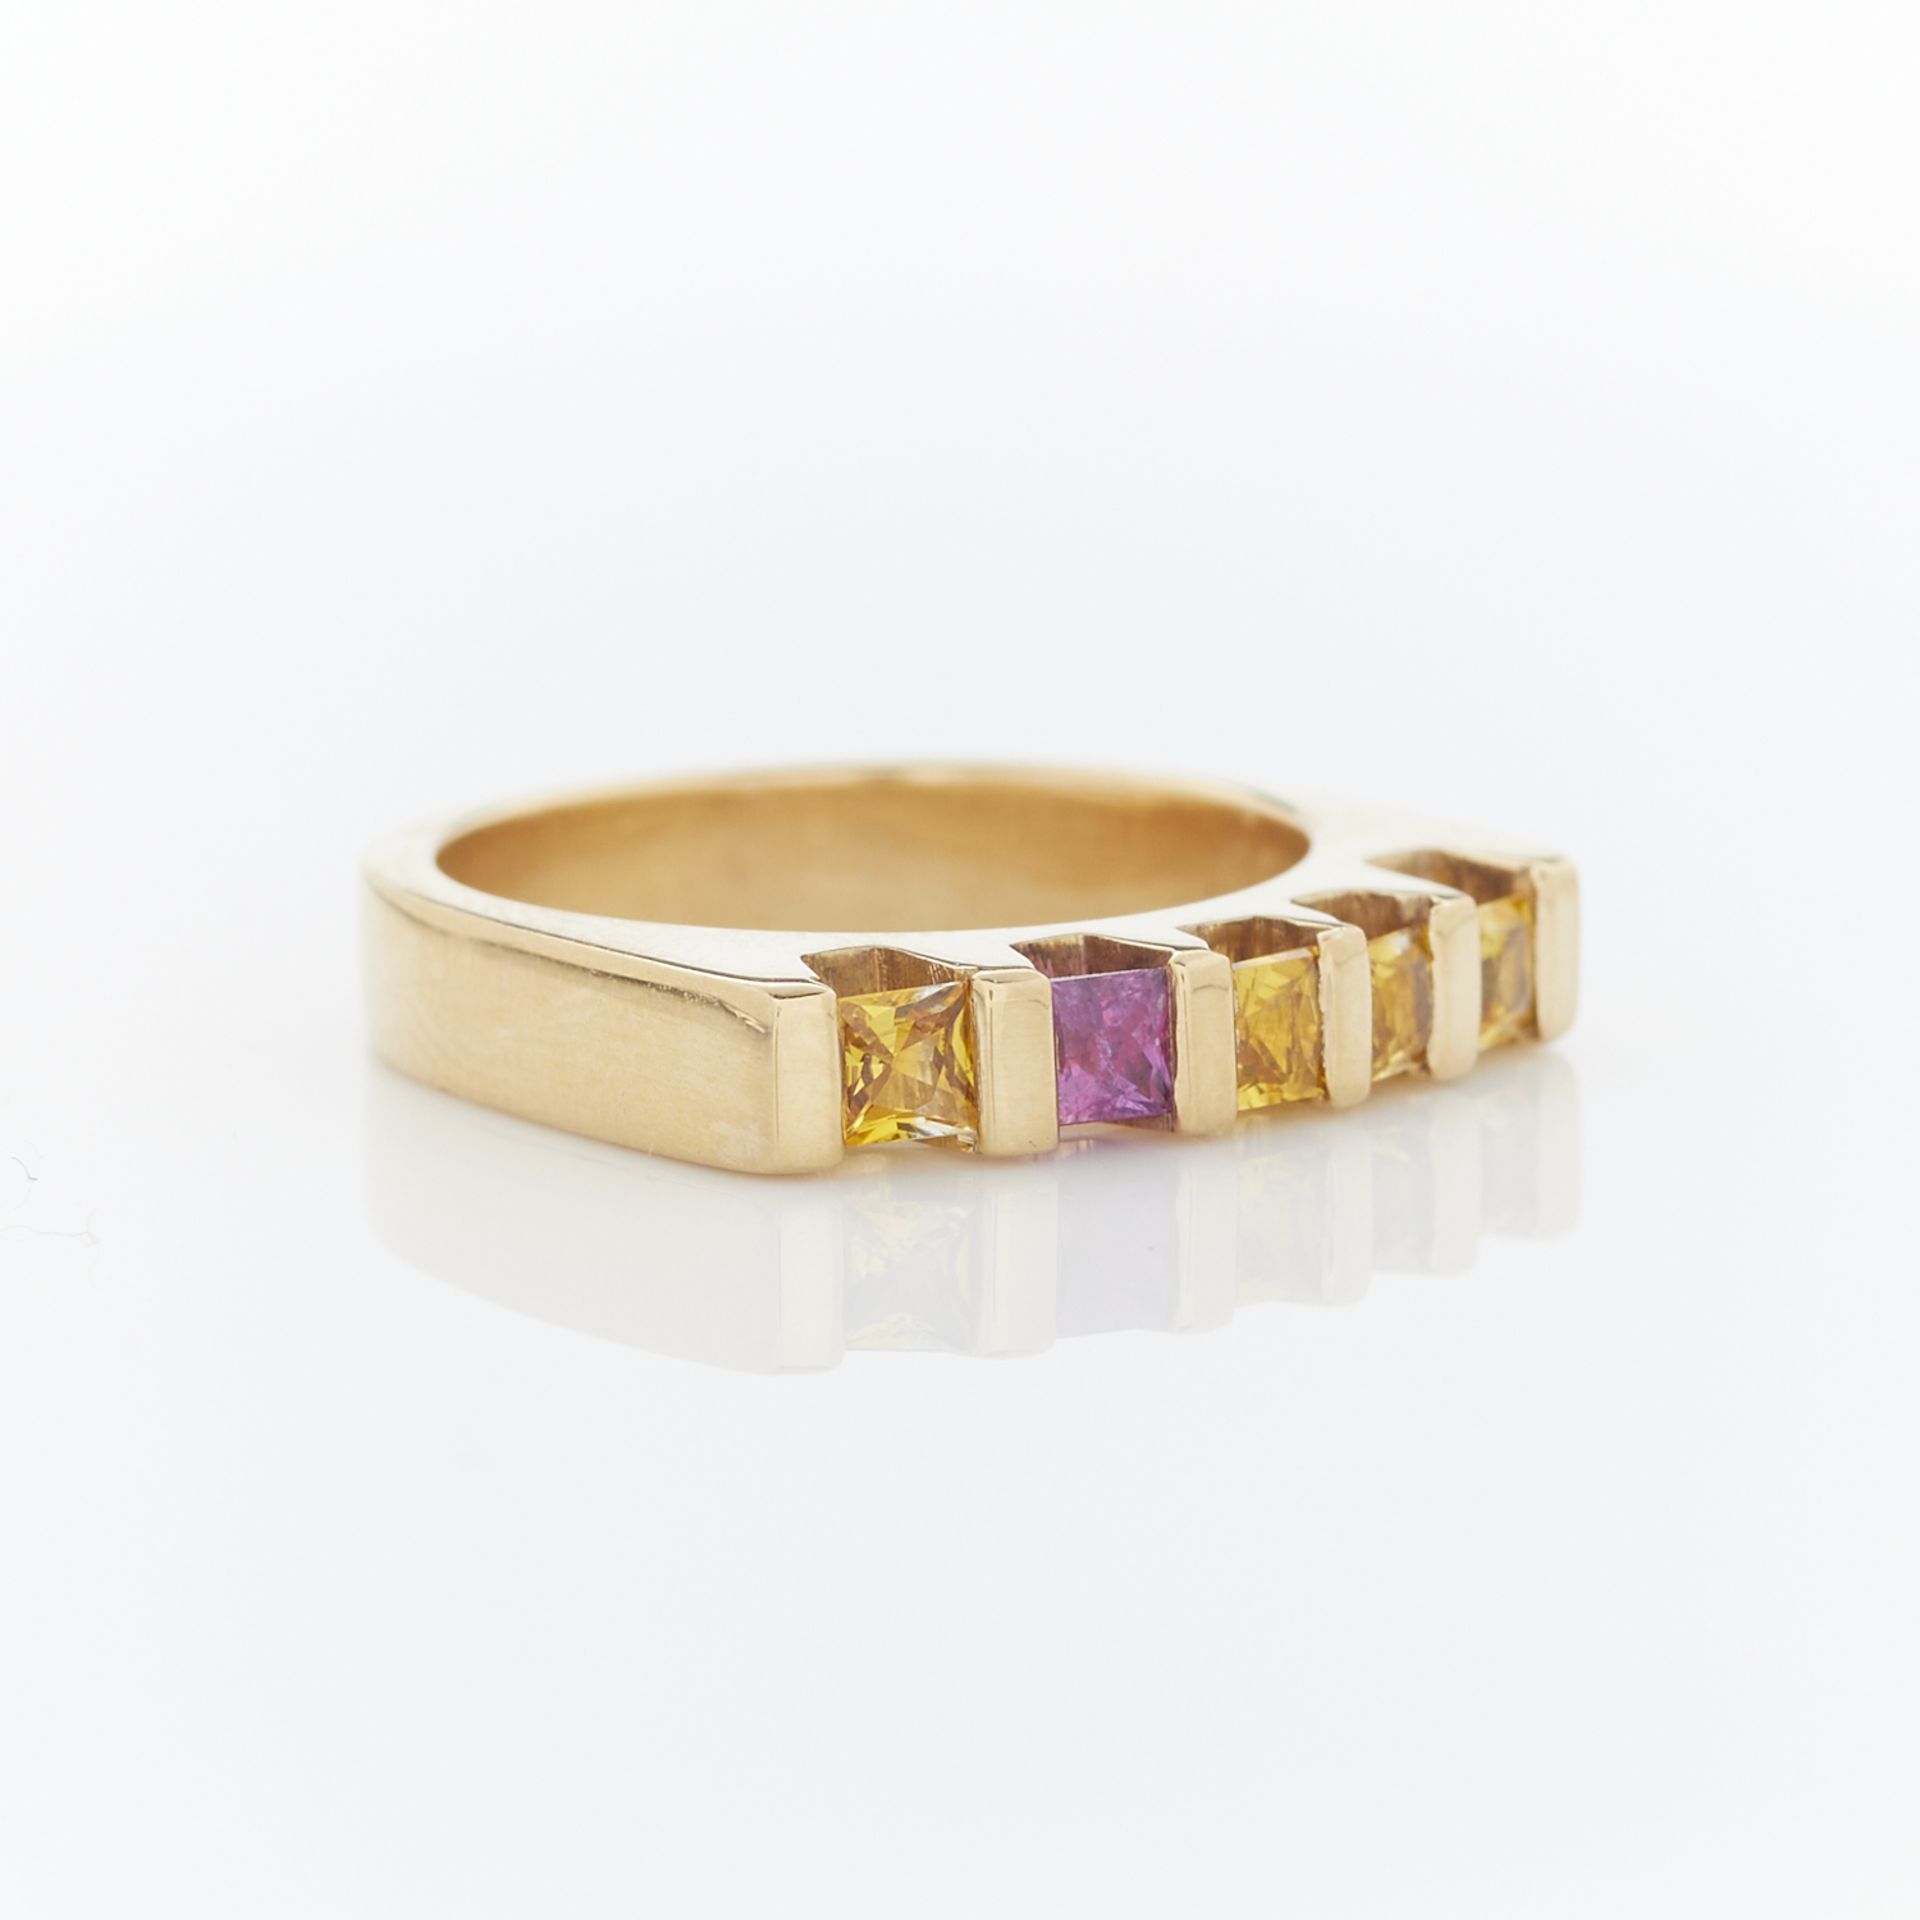 14k Yellow Gold & Sapphire Ring - Image 9 of 11